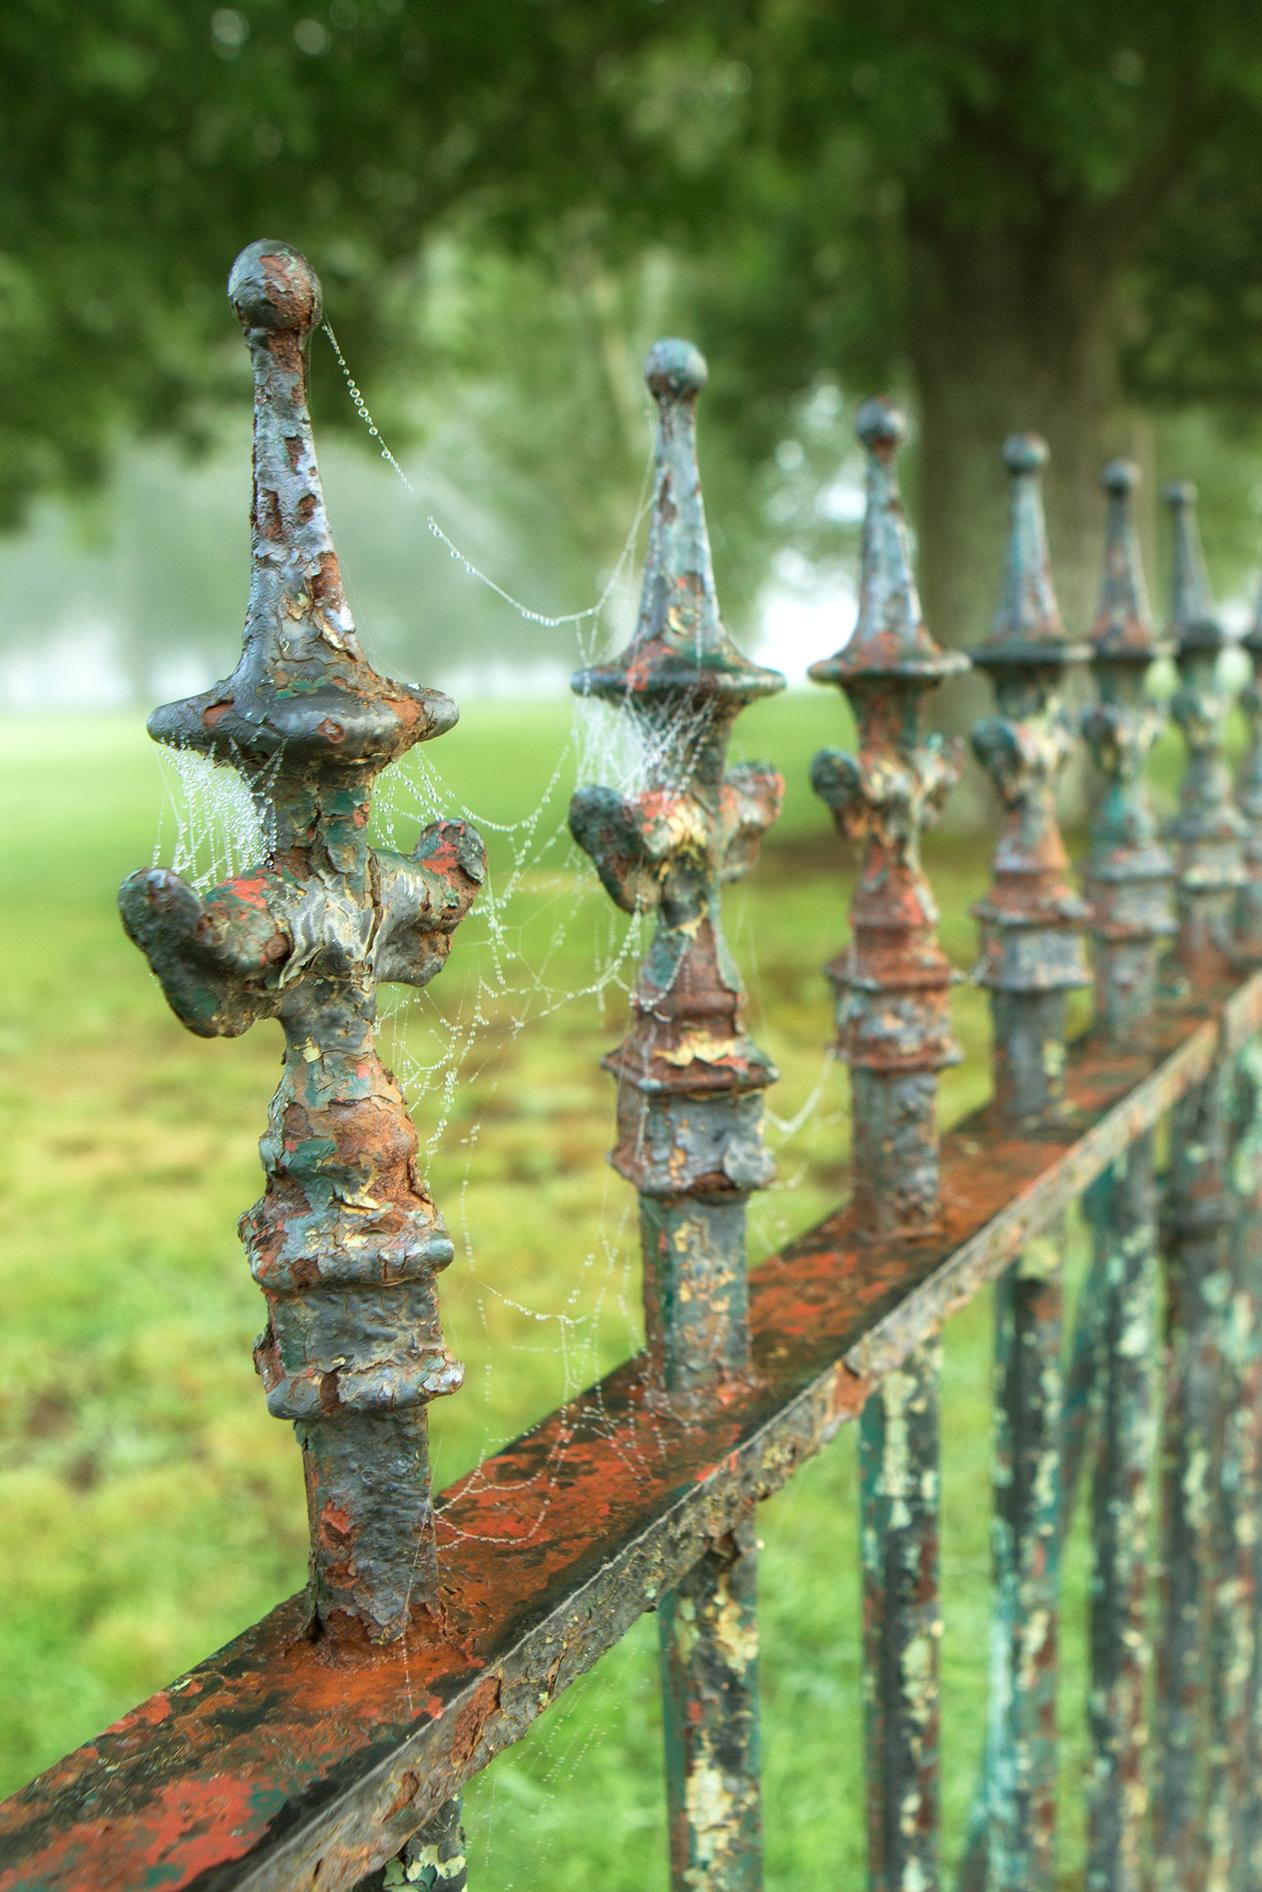 Rebecca Skinner’s “Iron” is a 18 x 12 inch metal print of a wrought iron fence. The color photograph has a satin finish and is infused directly into metal making it waterproof and easy to clean. The frameless print is wired and ready to hang. The